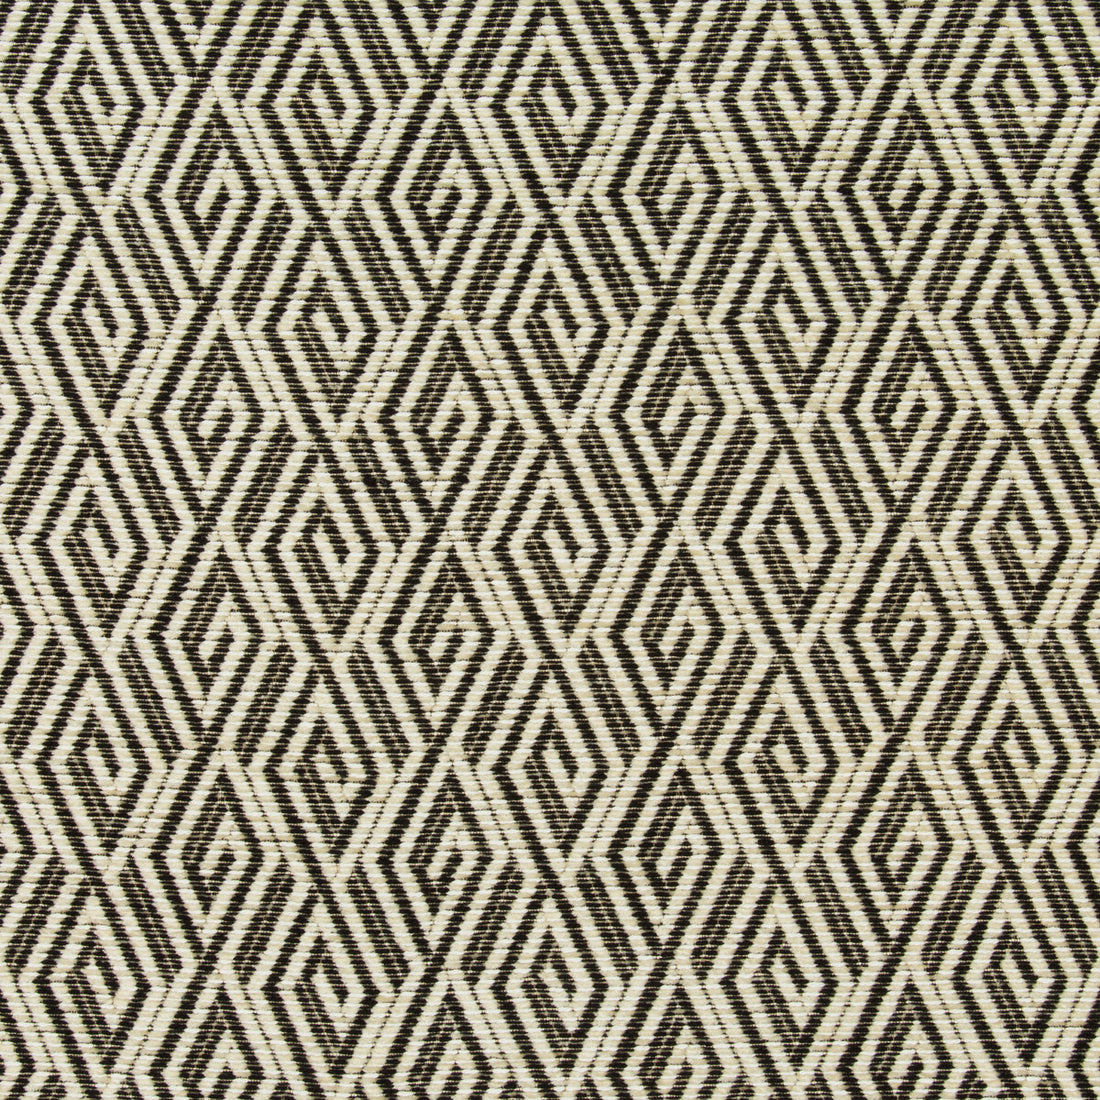 Kravet Design fabric in 34972-8 color - pattern 34972.8.0 - by Kravet Design in the Performance Crypton Home collection